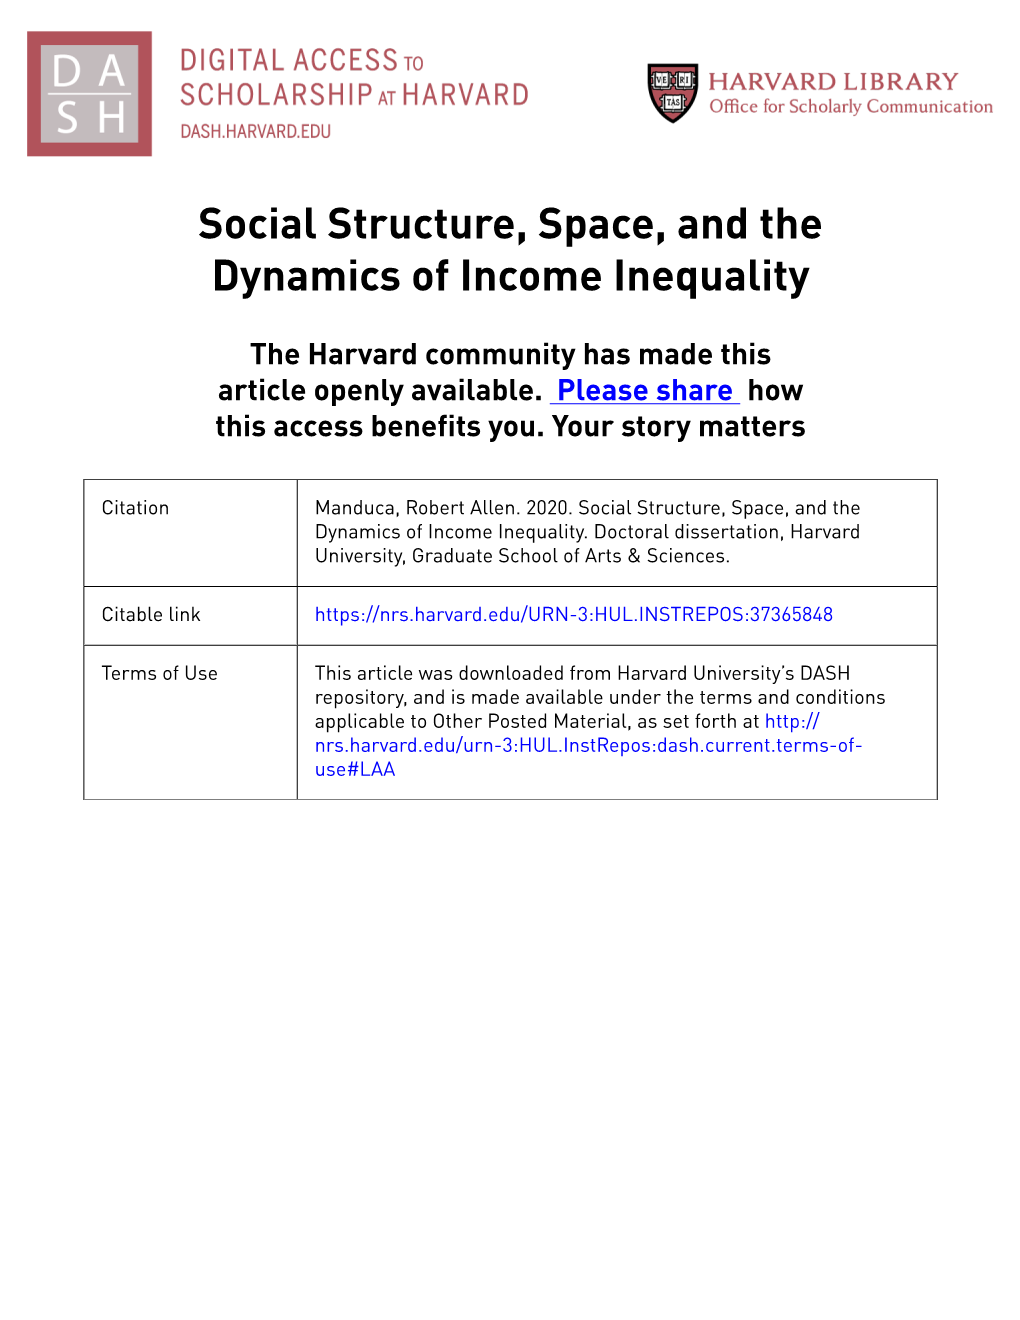 Social Structure, Space, and the Dynamics of Income Inequality